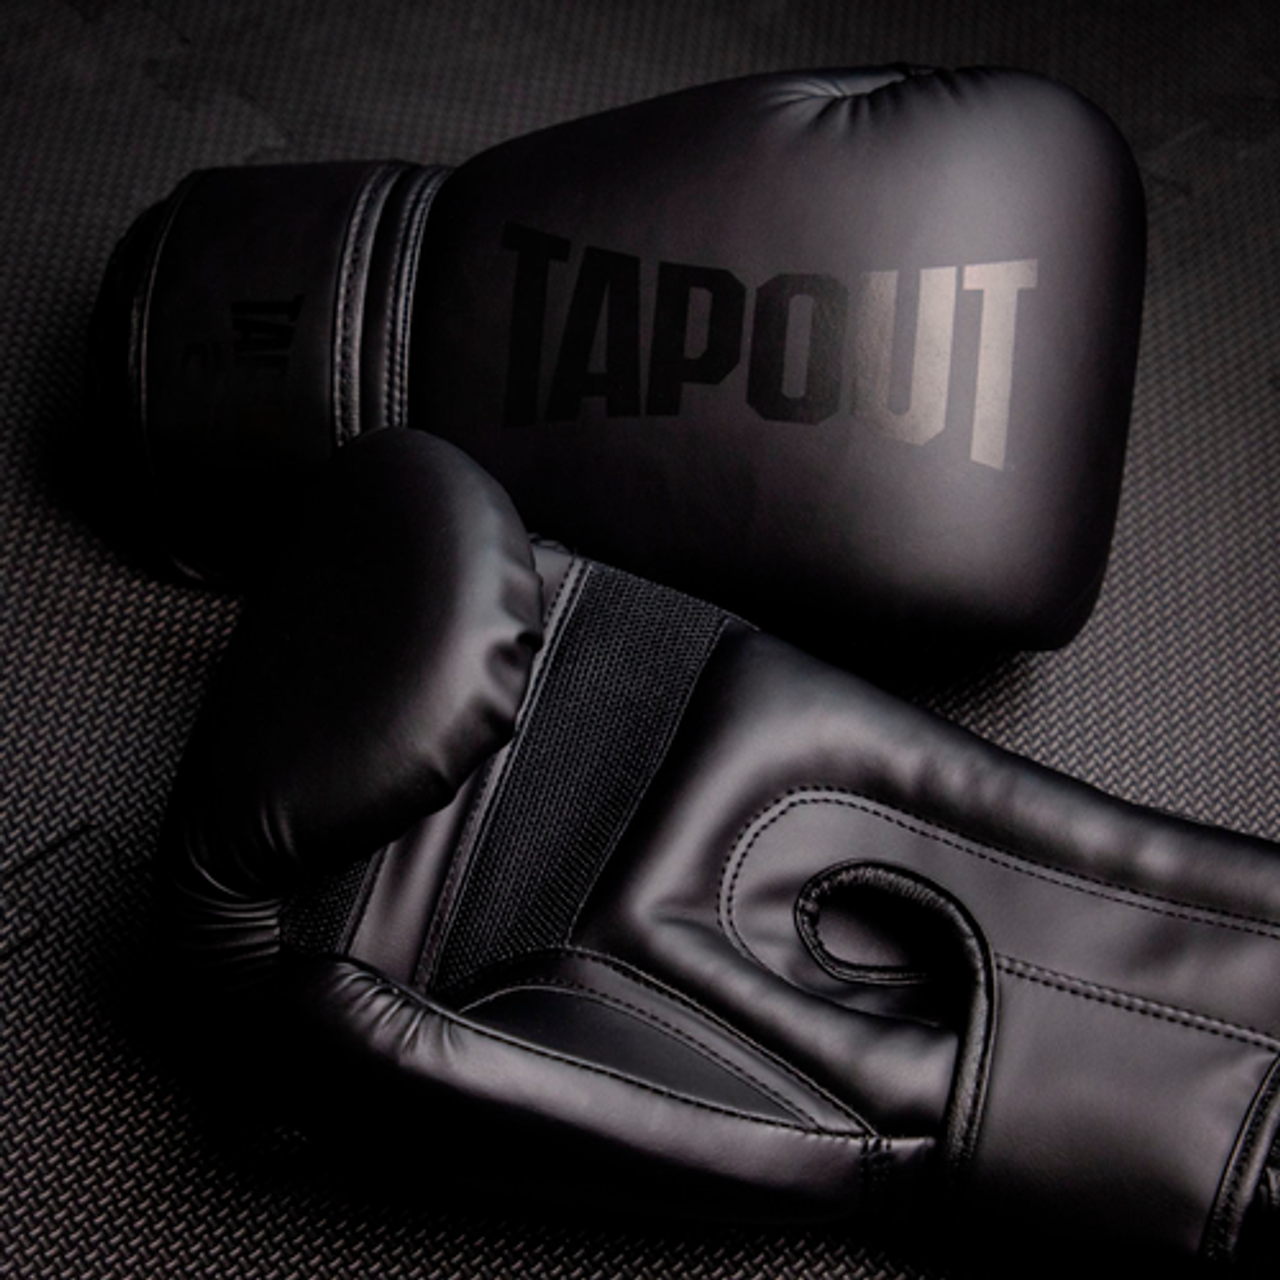 Tapout - Boxing Gloves with Mesh Palm for Men and Women - Black